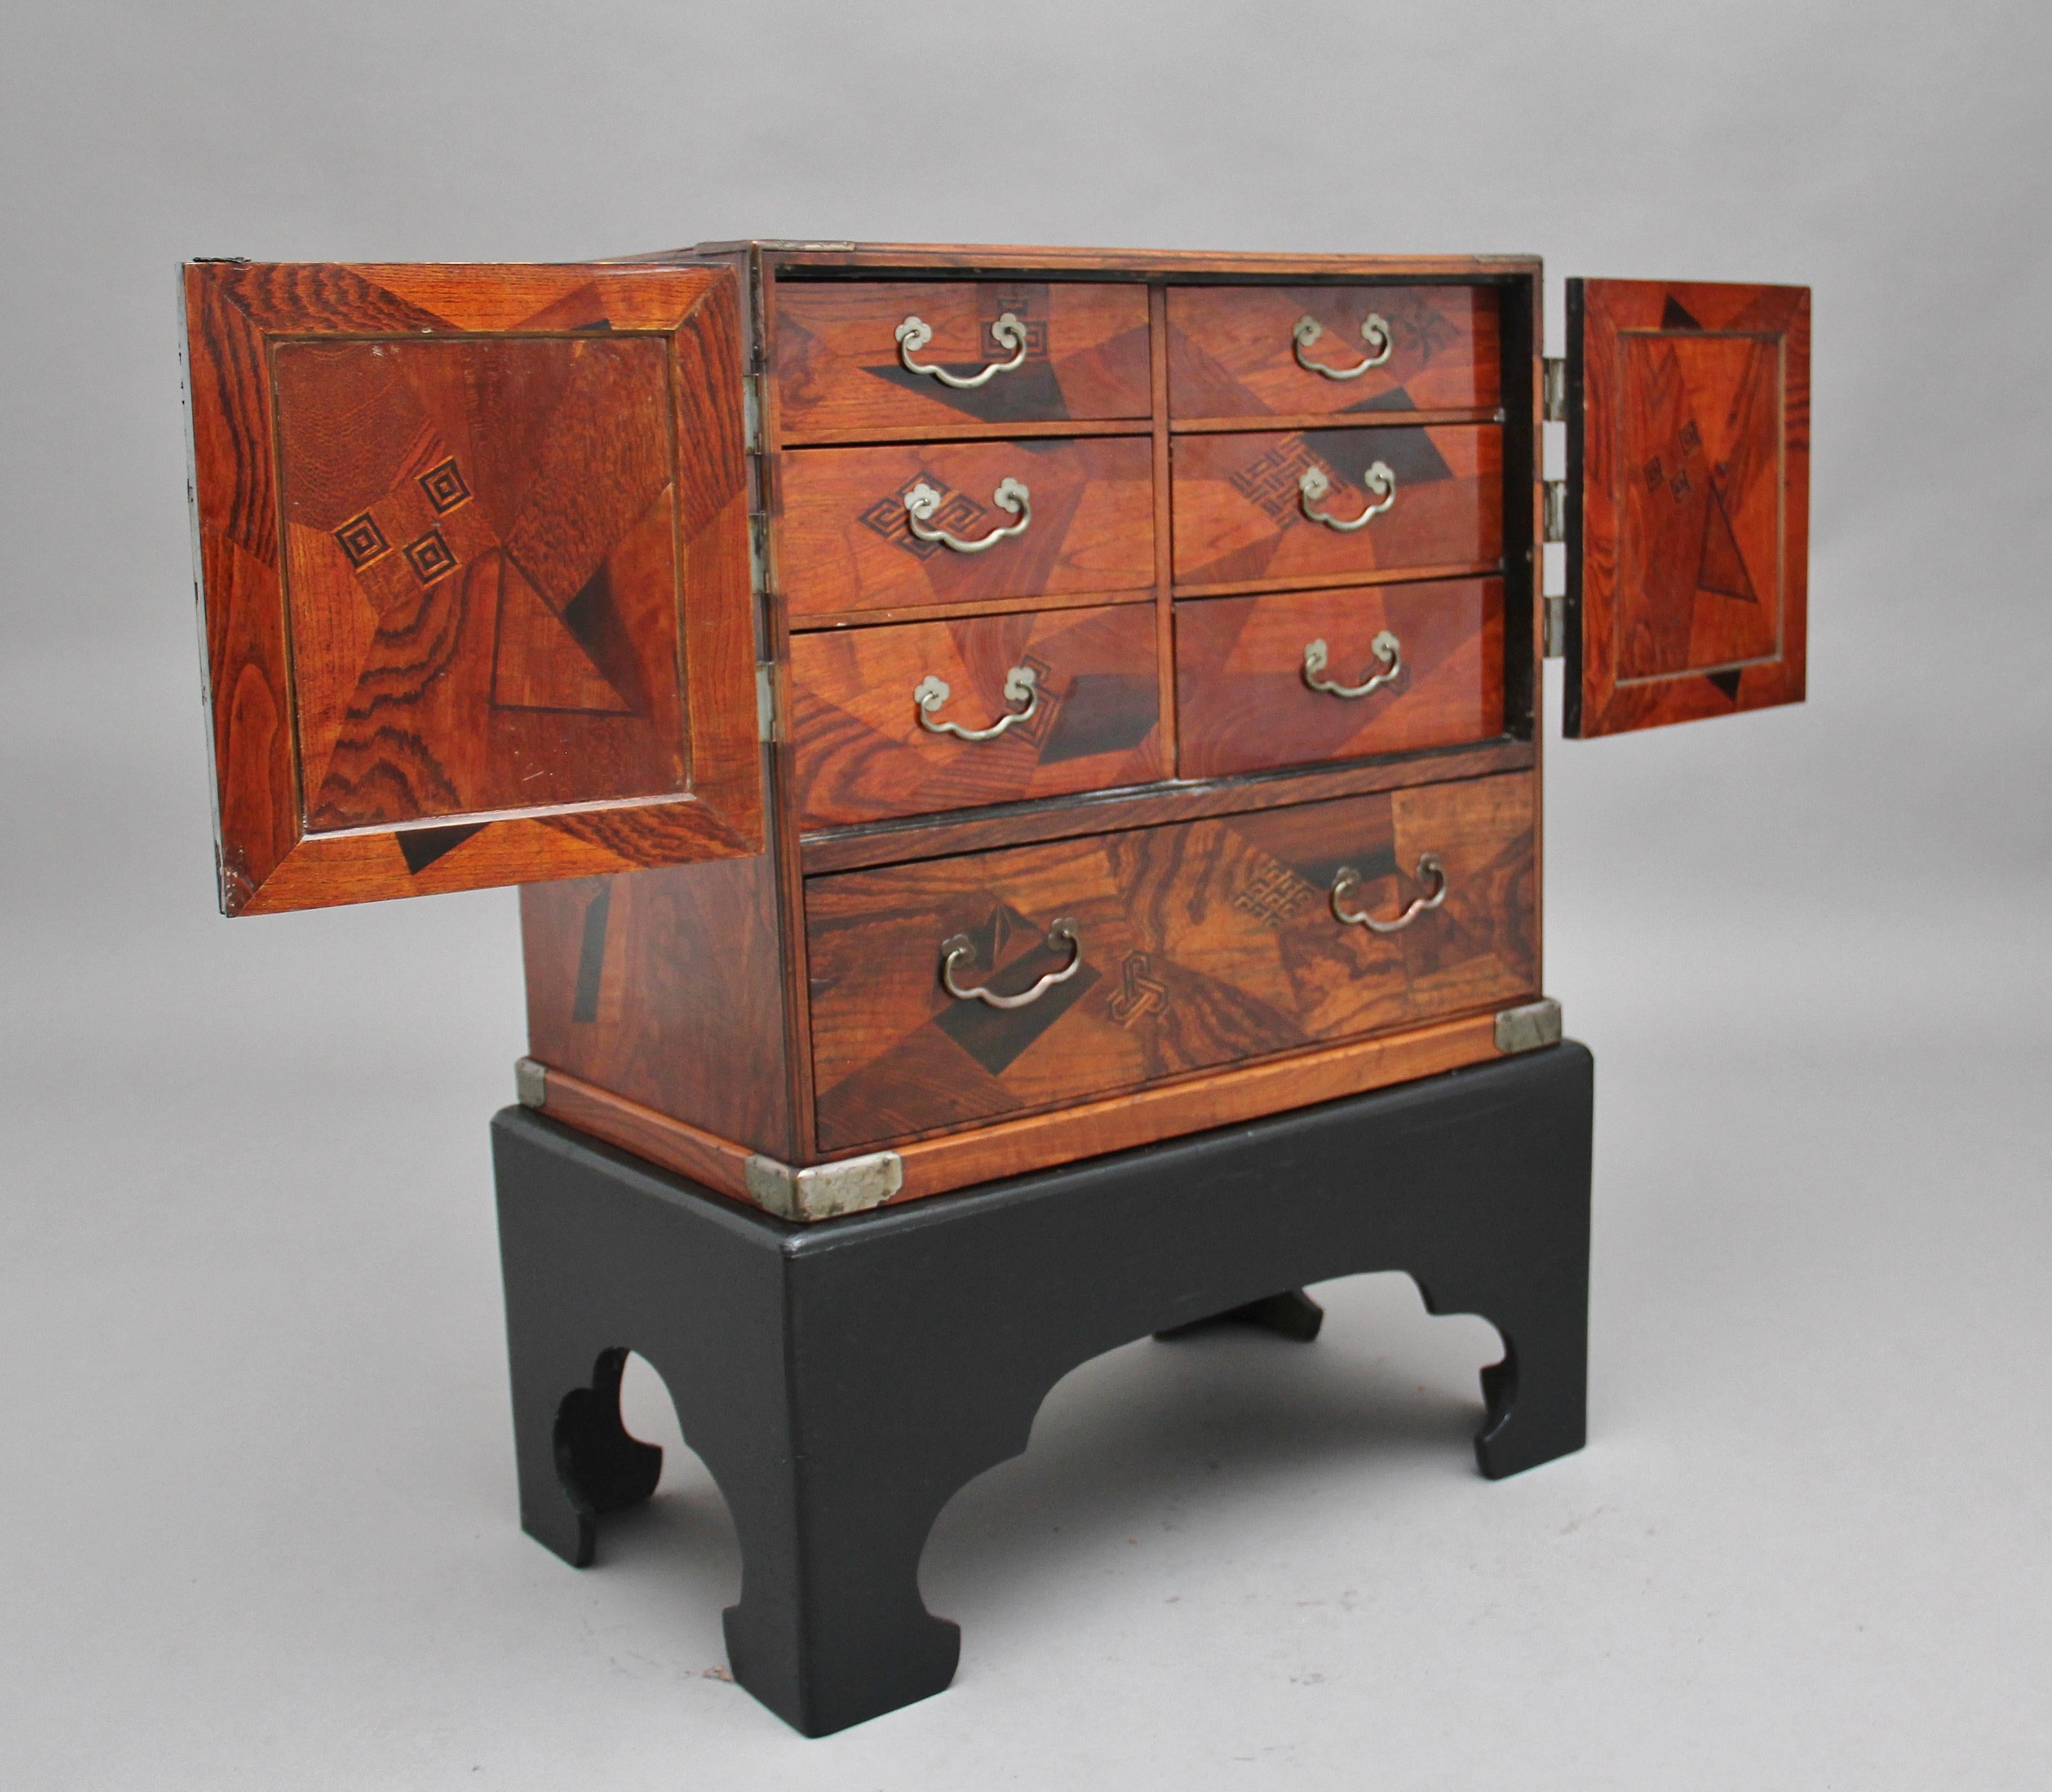 19th century Japanese parquetry kodansu from the Meiji period, the rectangular cabinet with a pair of paneled doors painted with cockerels amidst flowering branches, applied with ornate brass spandrels and hinges, enclosing six conforming parquetry